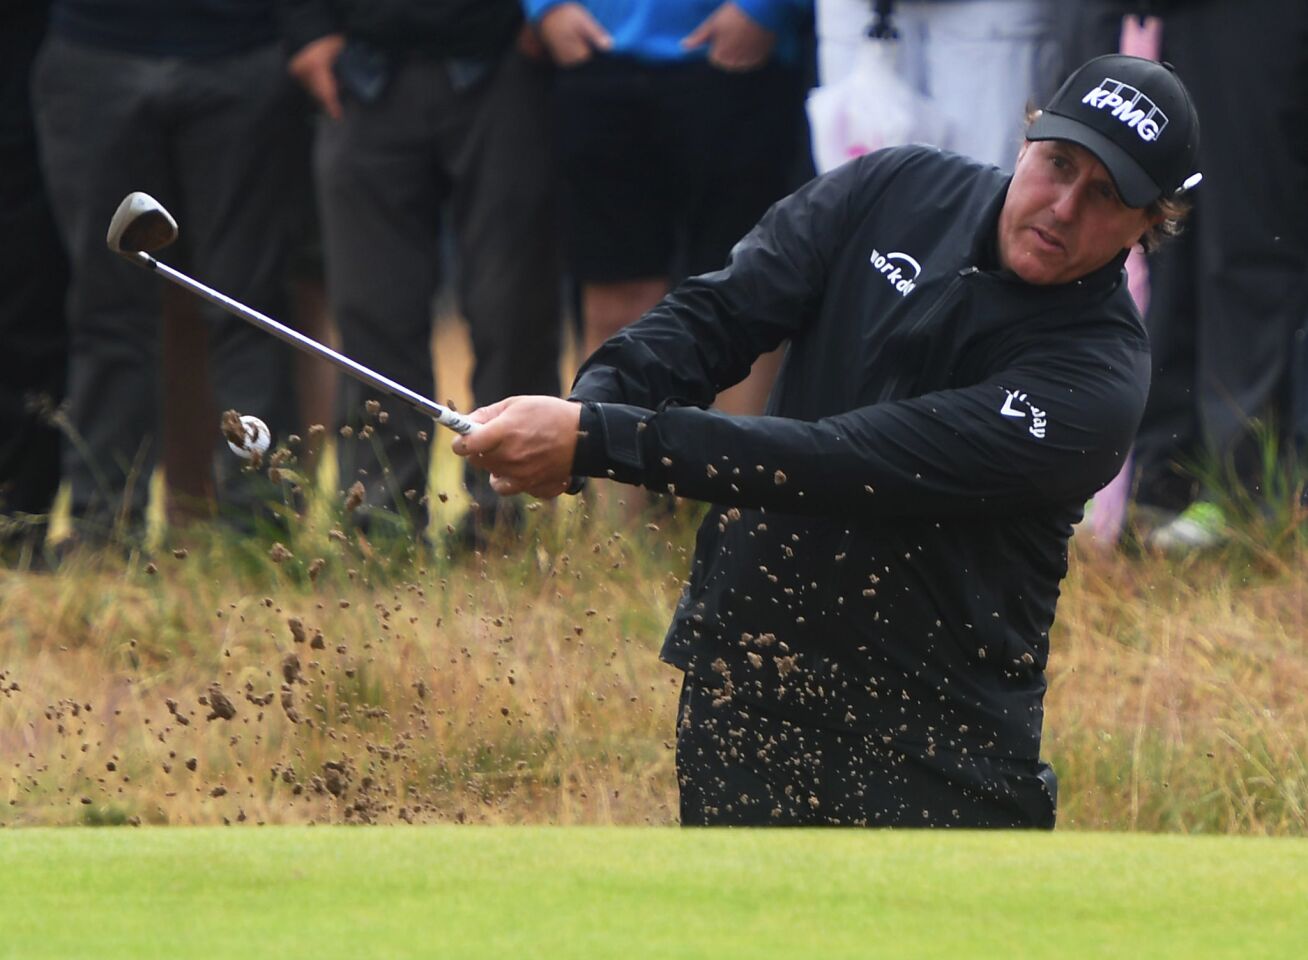 Phil Mickelson blasts out of a fairway bunker during the second round of the Britsh Open.